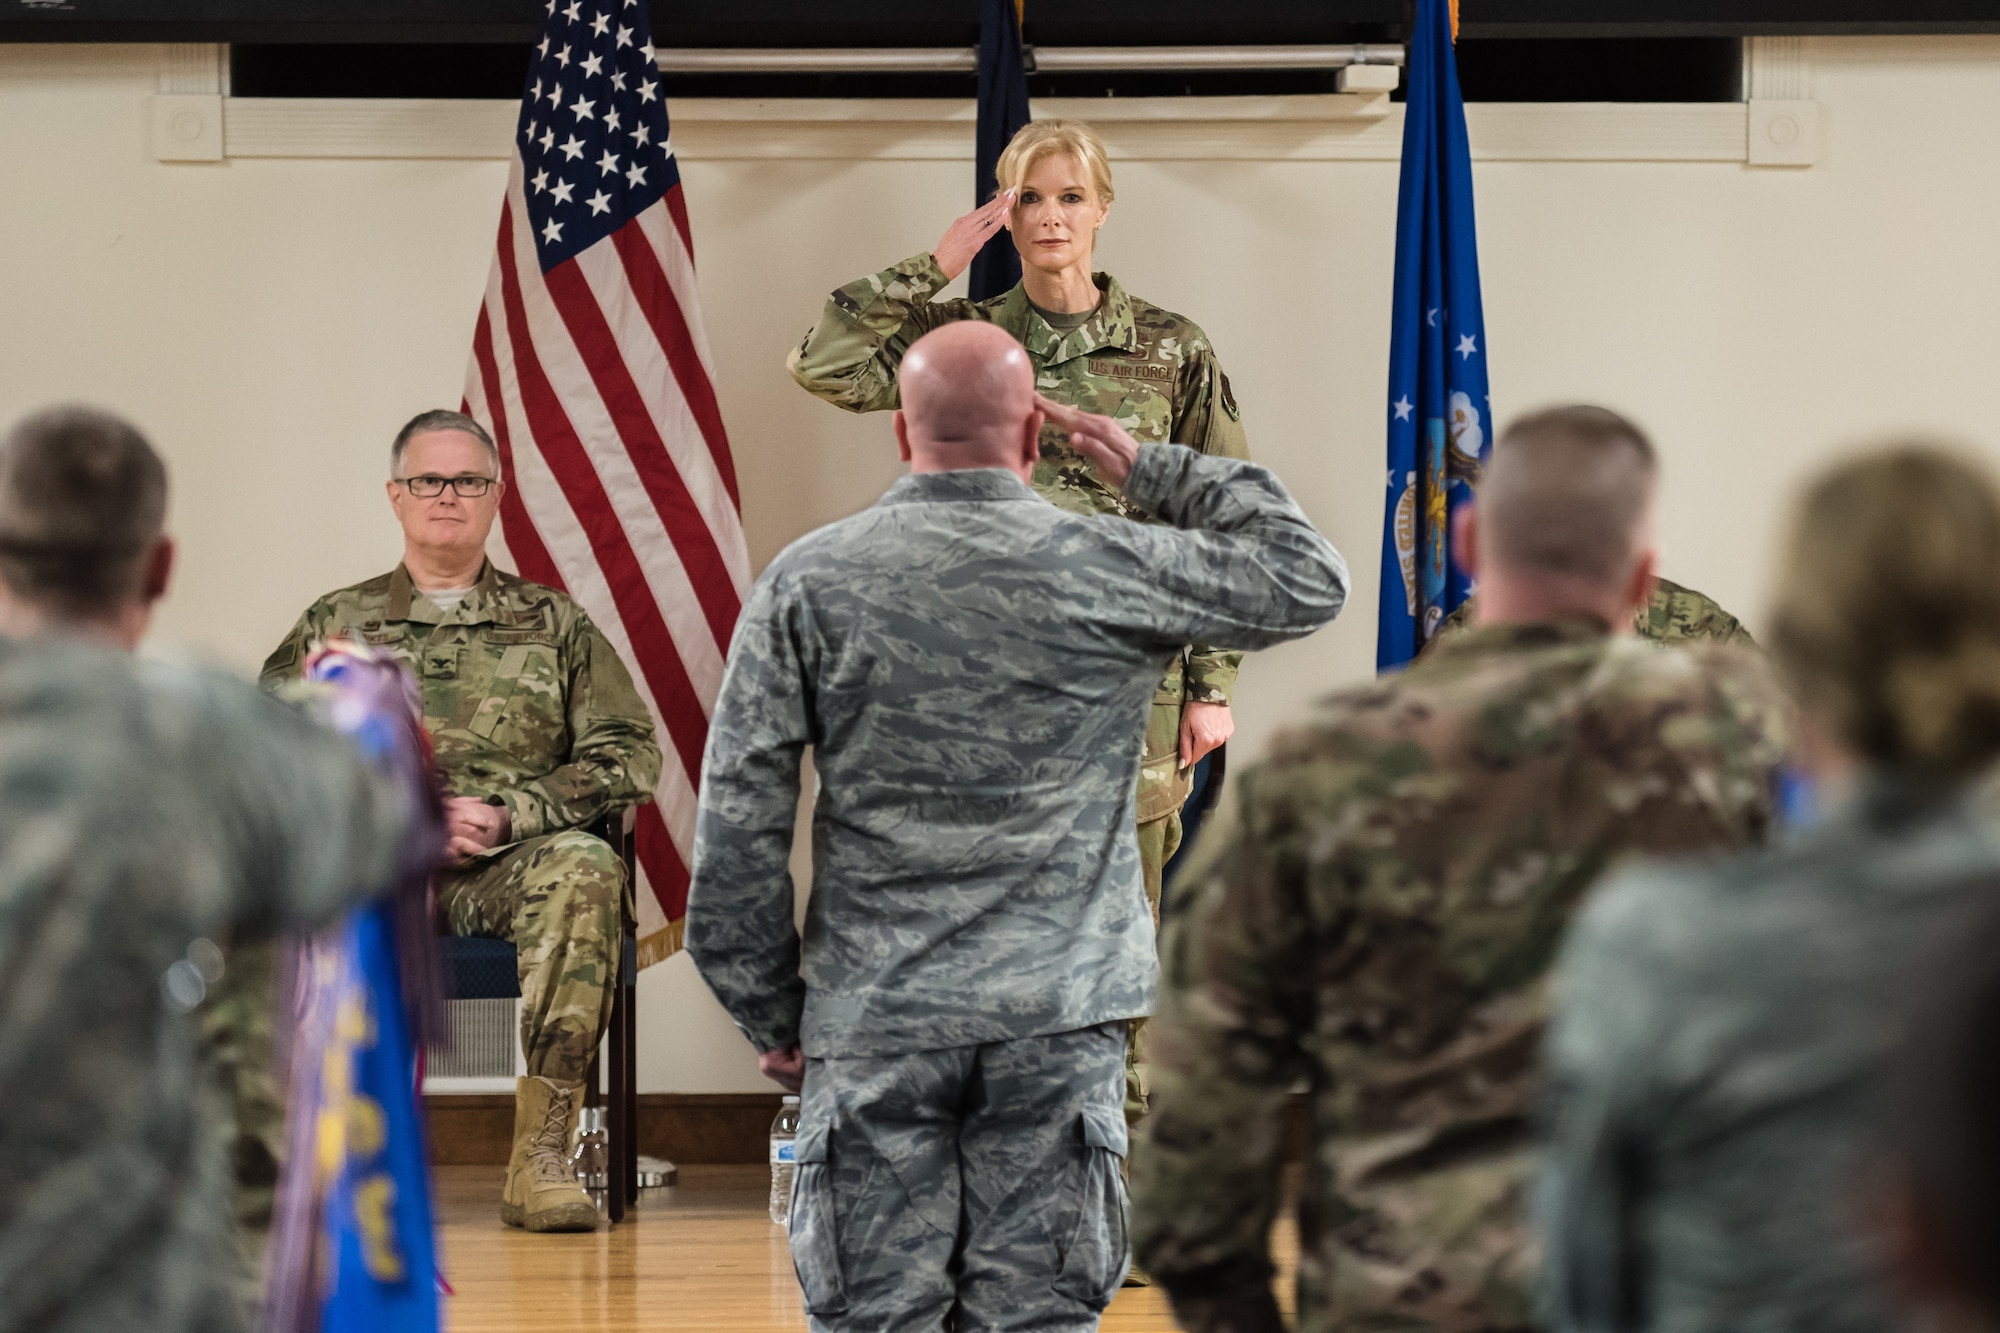 Col. Mary Decker receives her first salute as she takes command of the 123rd Mission Support Group during a ceremony at the Kentucky Air National Guard Base in Louisville, Ky., Jan. 5, 2019. Decker replaces Col. Patrick Pritchard, who has been named vice commander of the 123rd Airlift Wing. (U.S. Air National Guard photo by Dale Greer)